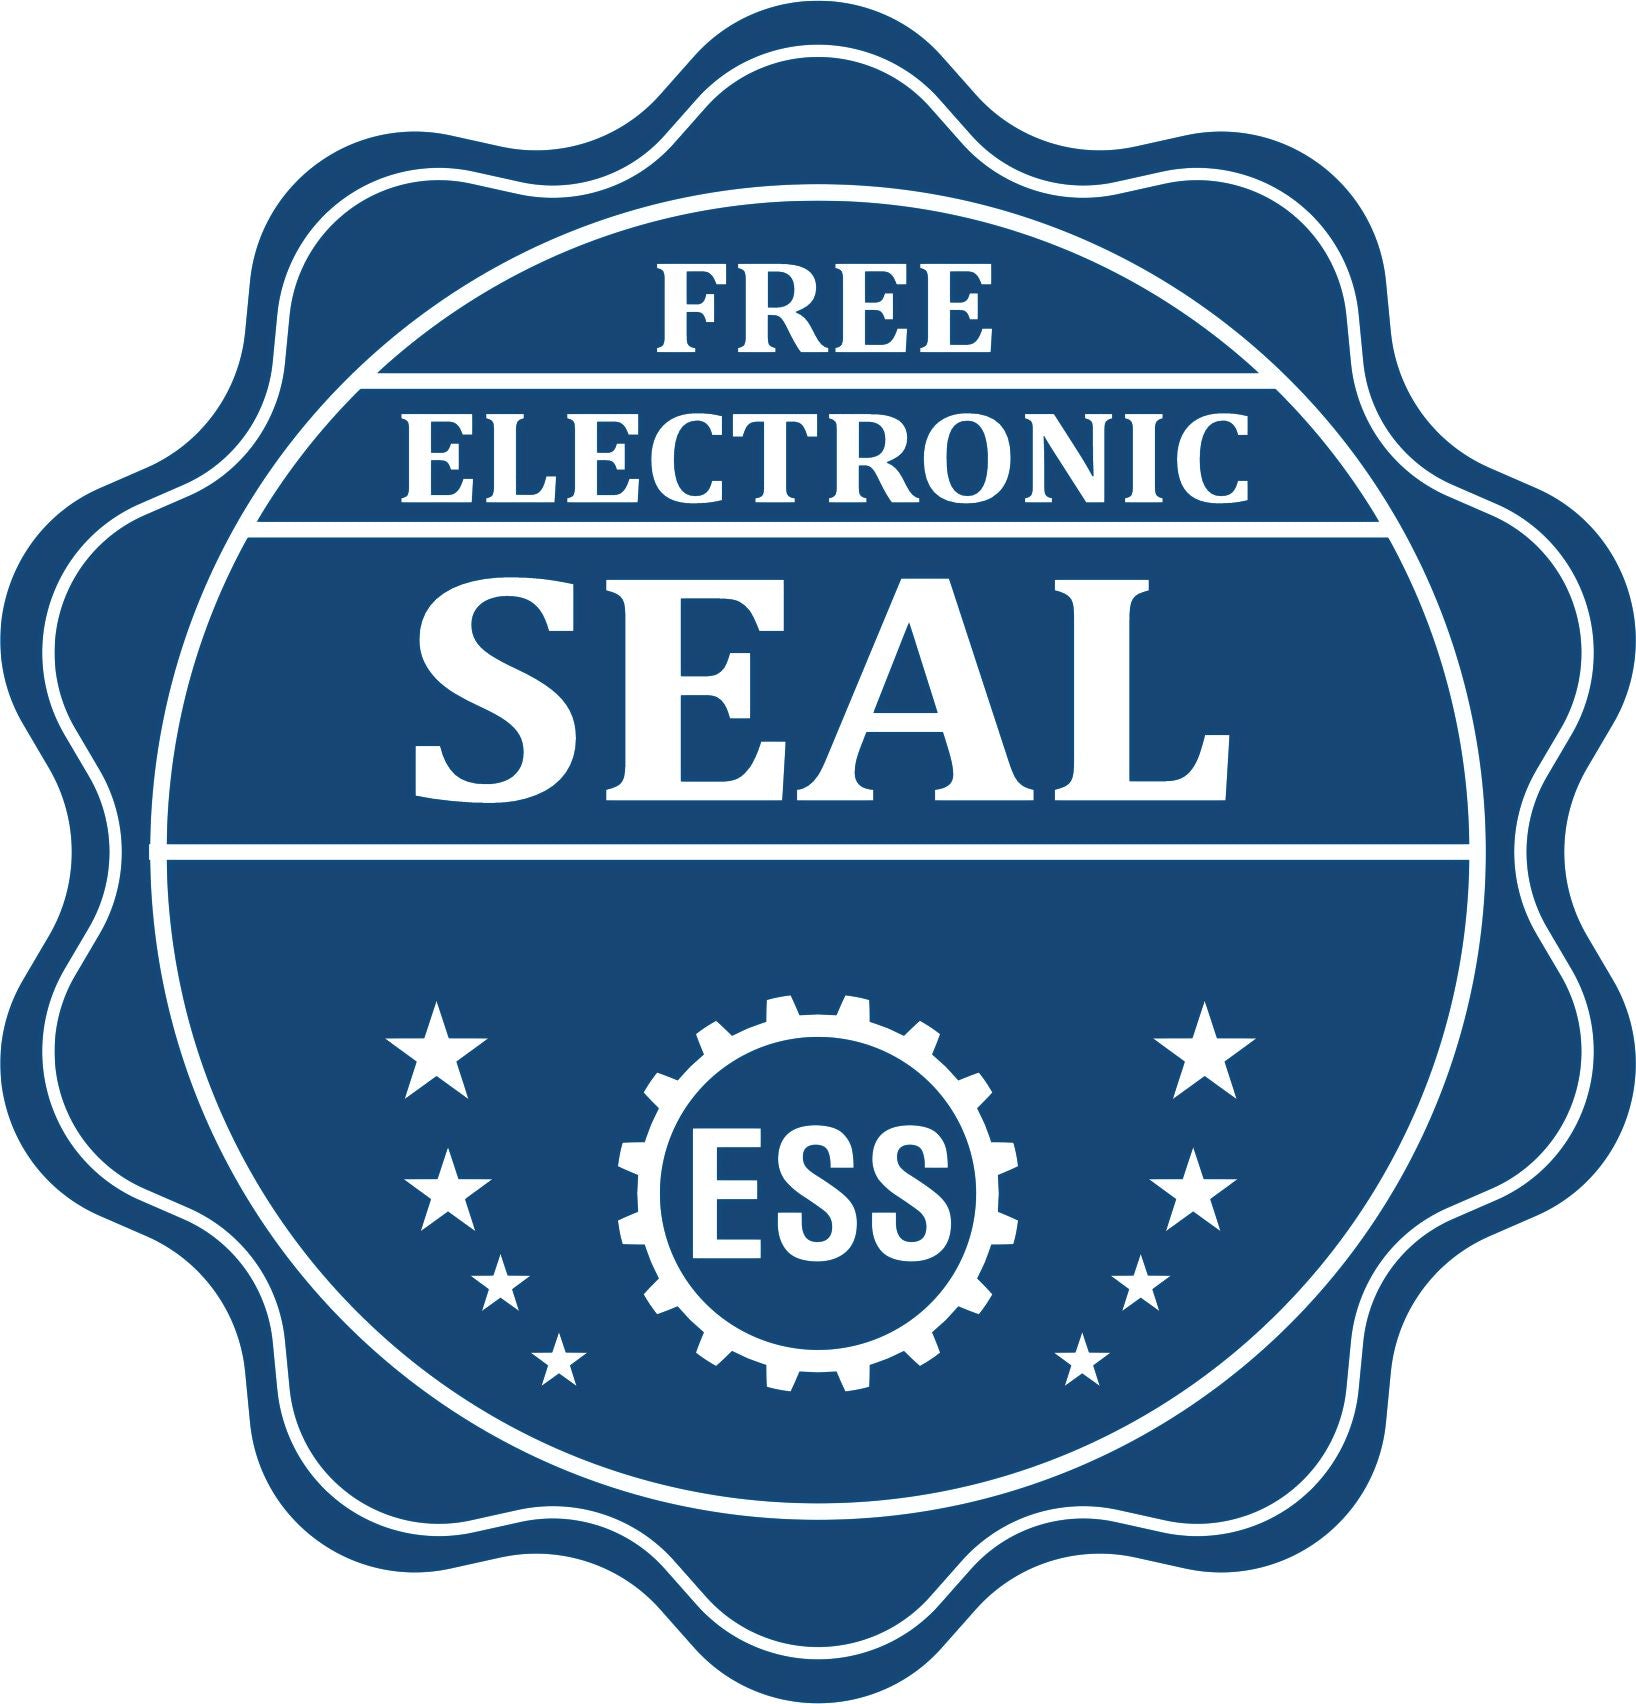 A badge showing a free electronic seal for the Gift Michigan Engineer Seal with stars and the ESS gear on the emblem.